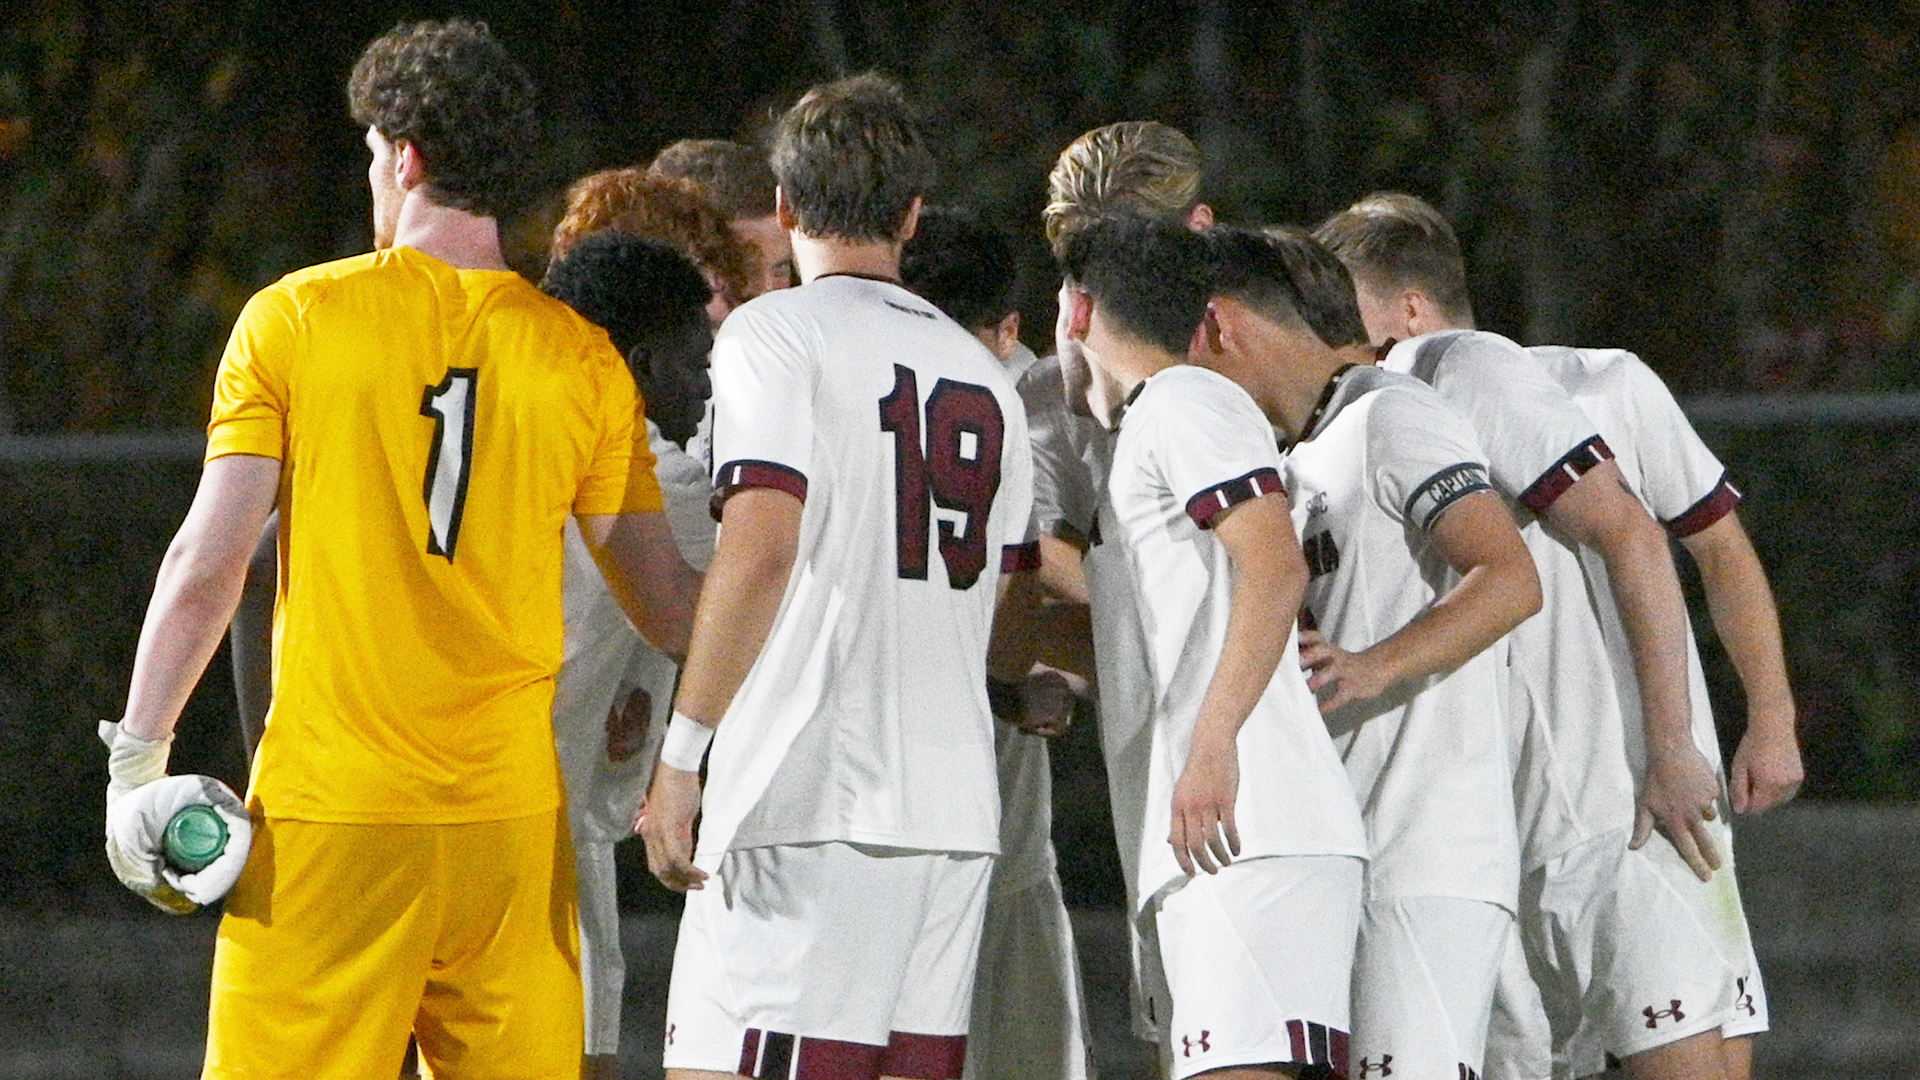 Men’s Soccer Wraps Up Home Schedule Friday with Senior Night